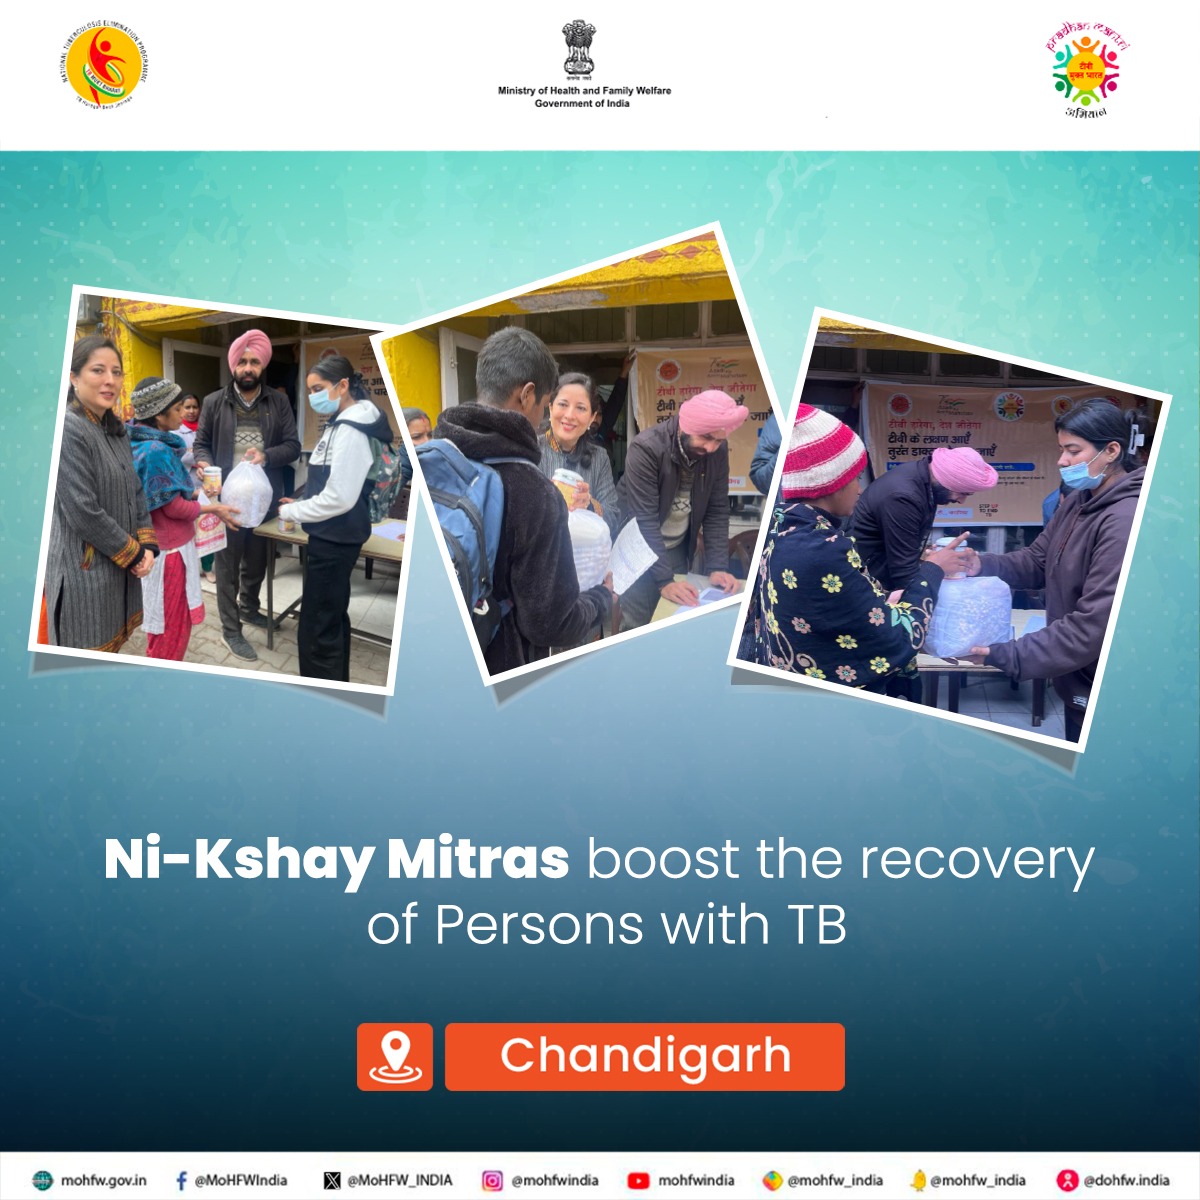 Fueling the resolve to #EndTB!
#NikshayMitras are on the frontlines of the TB battle as they distribute nutrition kits to Persons with TB in Chandigarh.

#TBMuktBharat #TBHaregaDeshJeetega